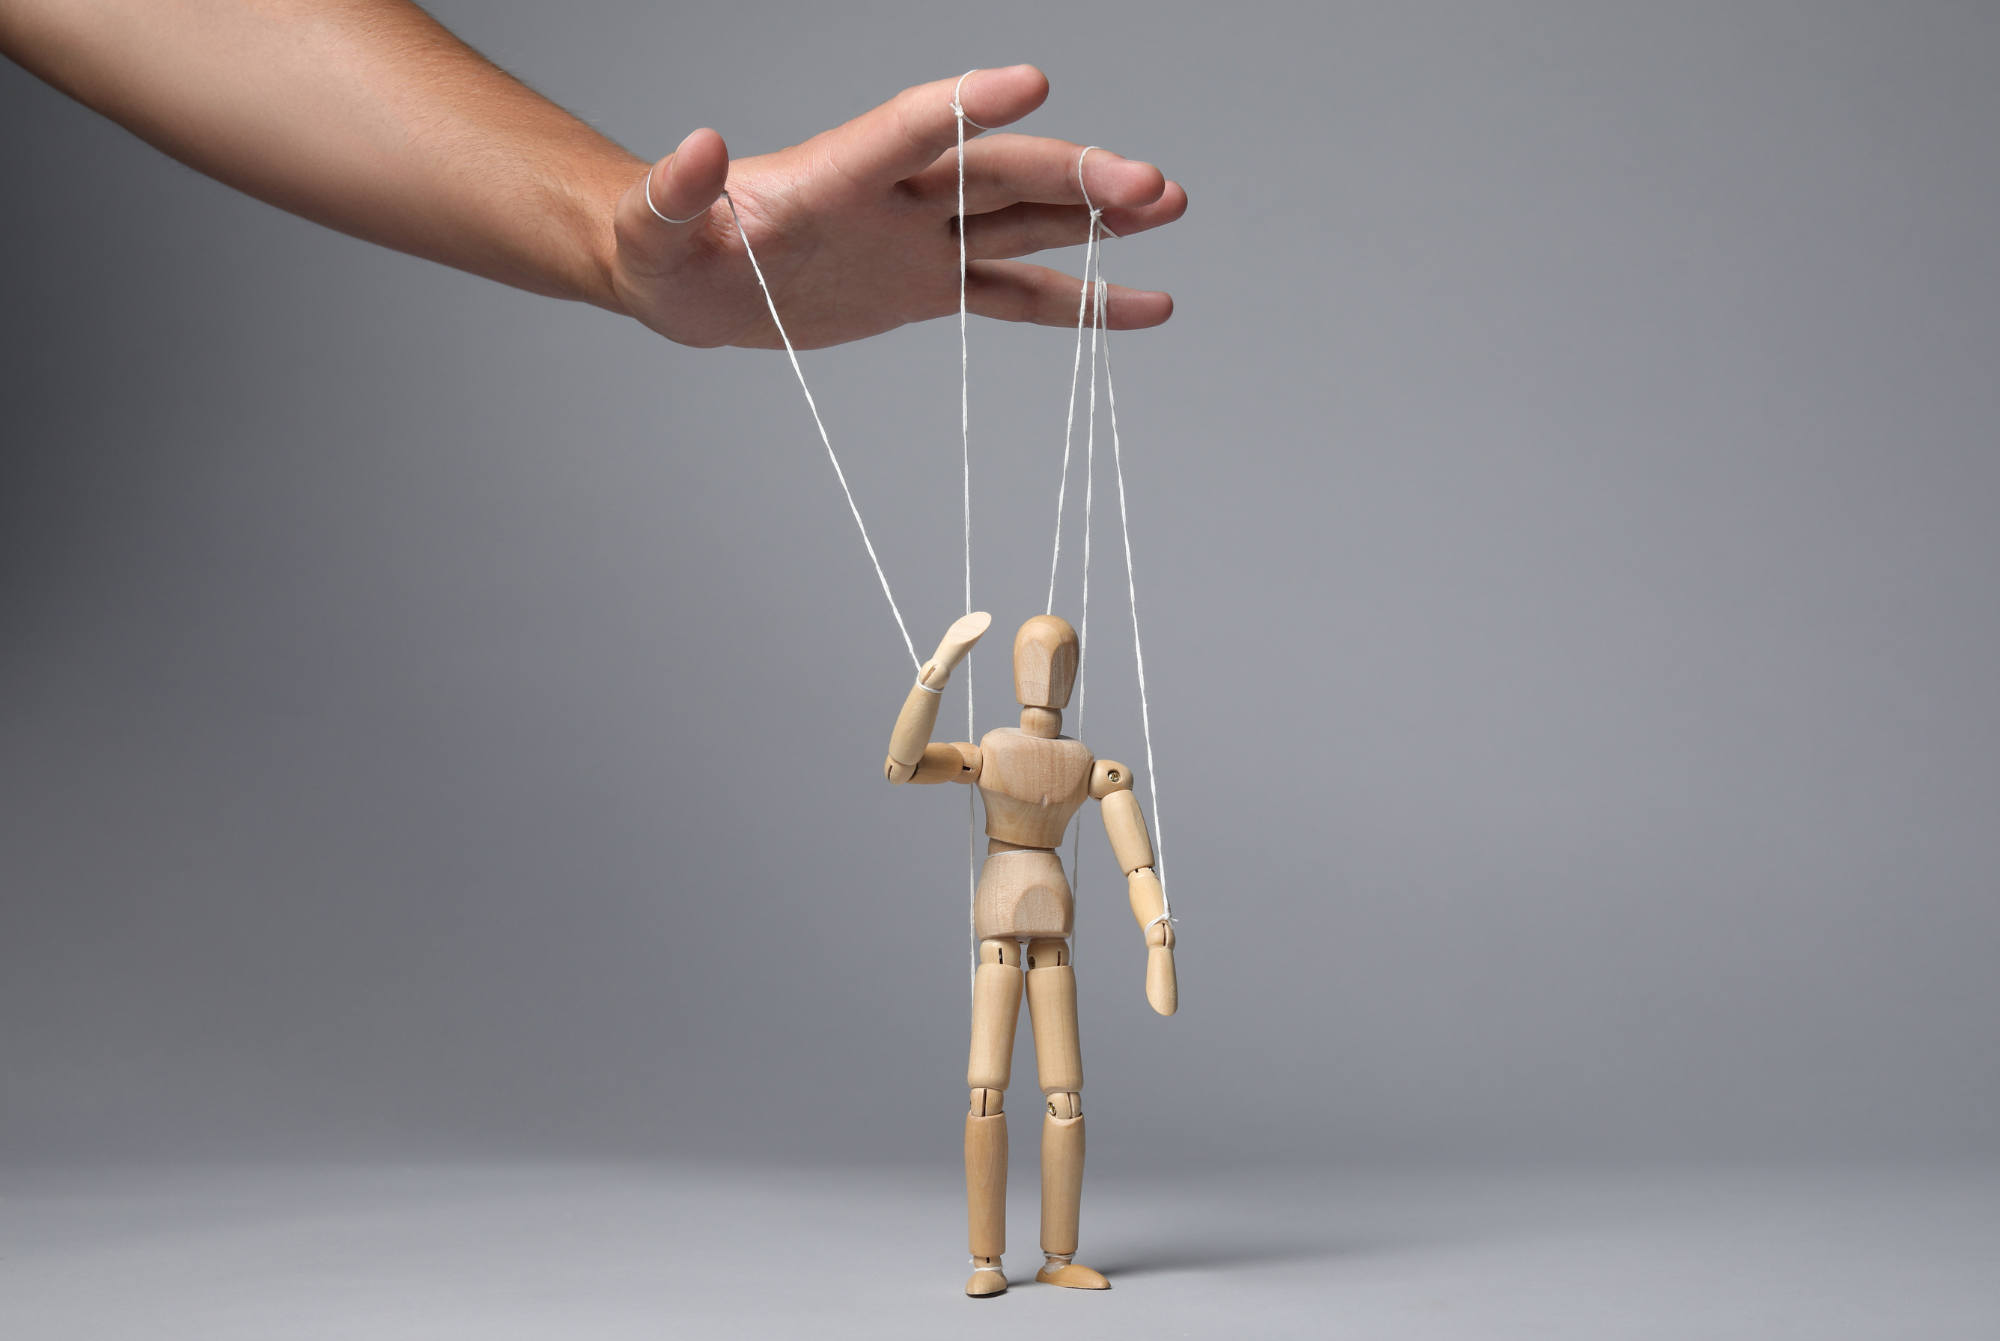 A puppet is controlled by strings attached to a hand hovering above it, symbolic of unhealthy relationships with red flags.